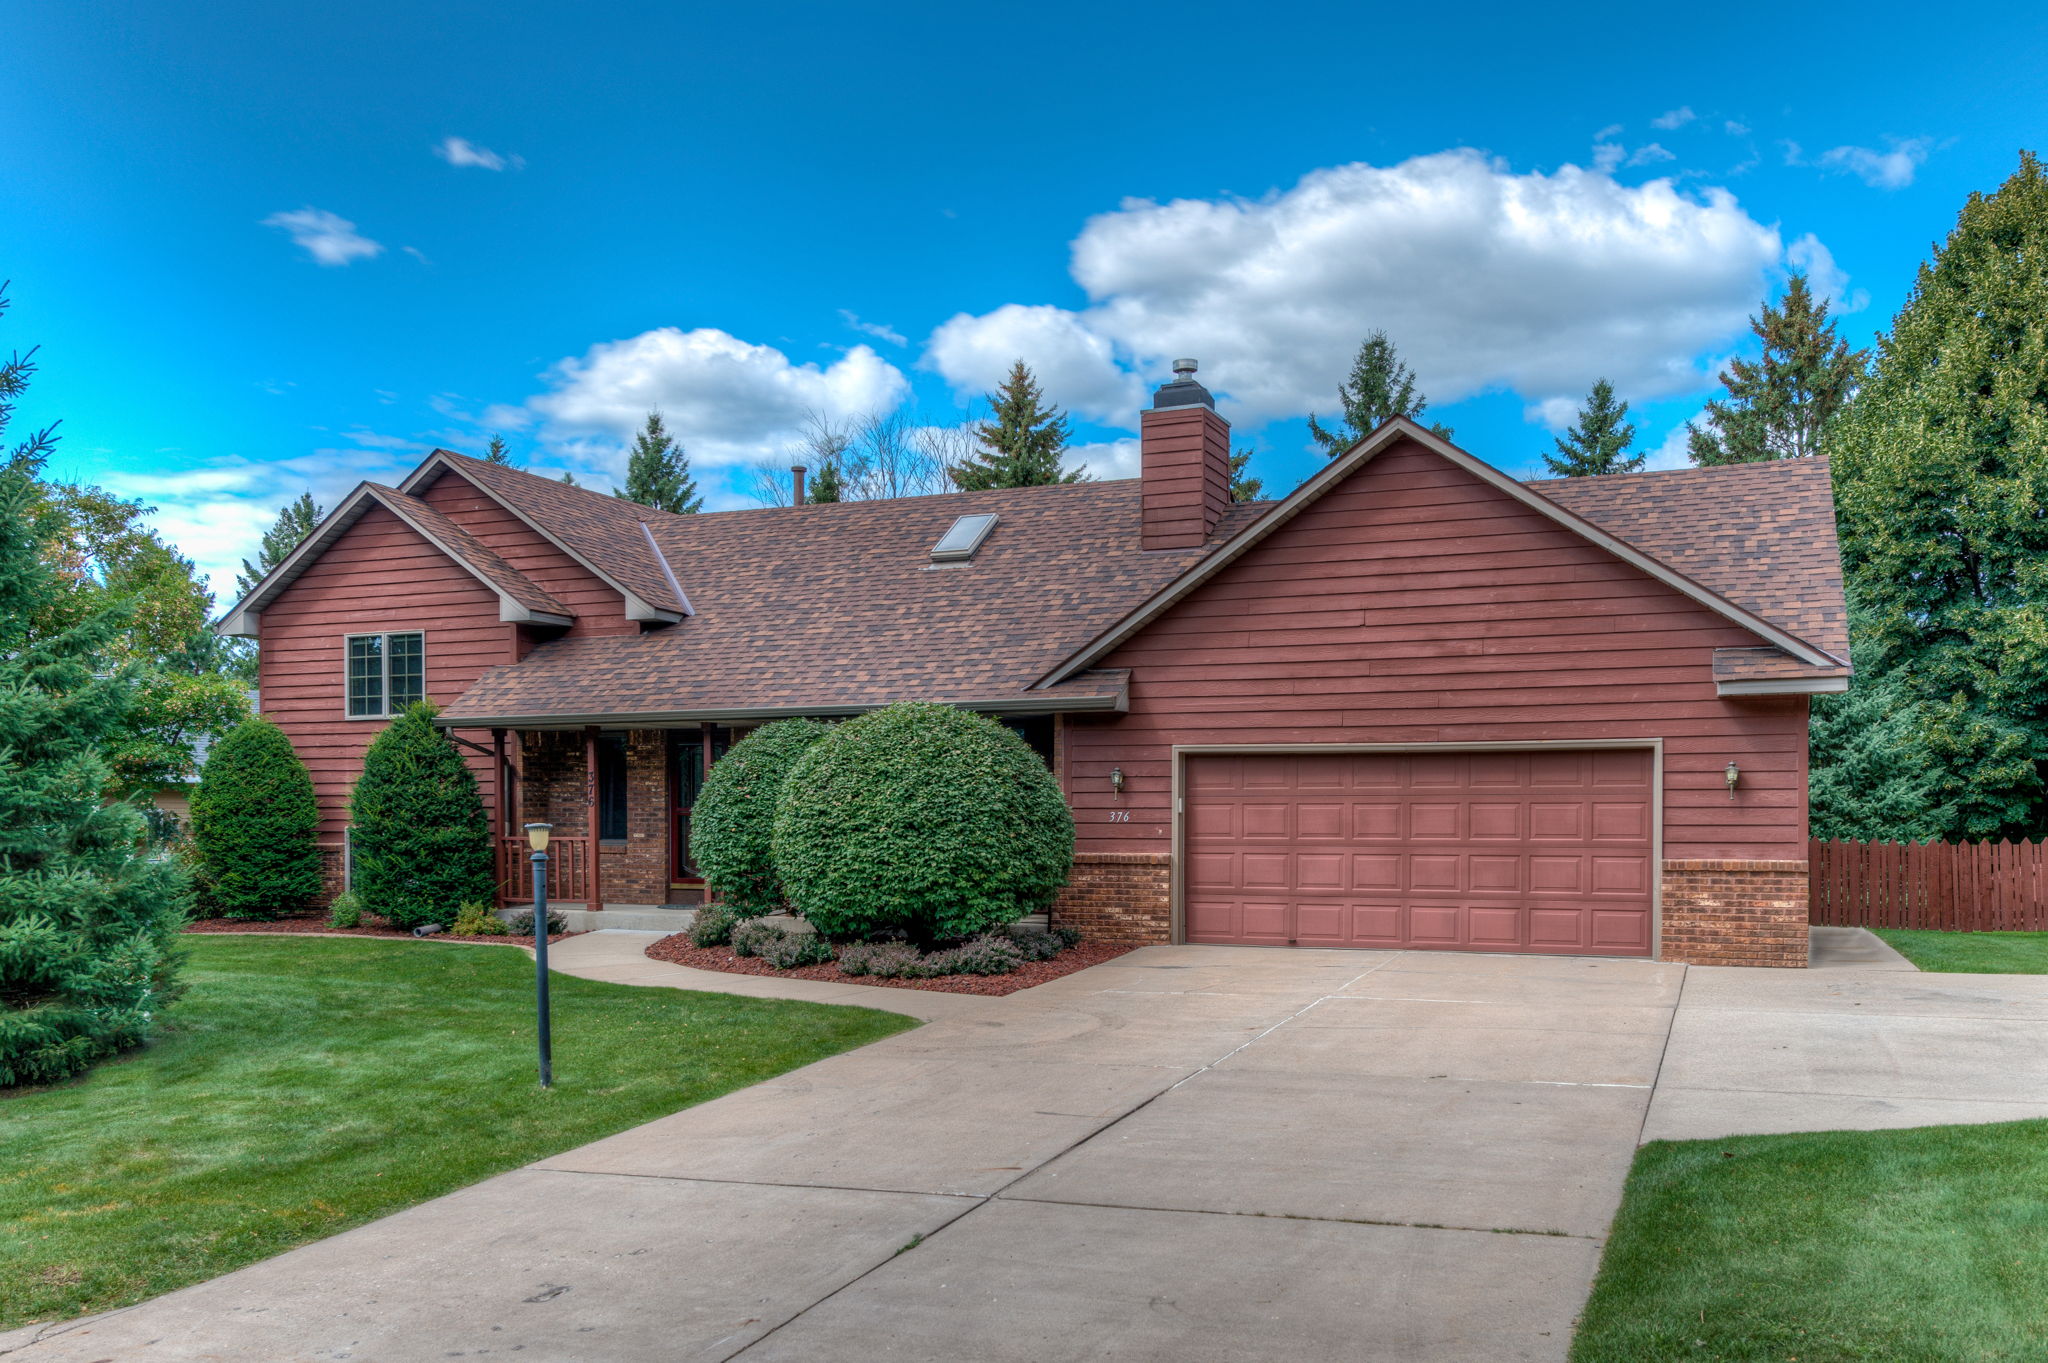  376 High Point Curve, Maplewood, MN 55119, US